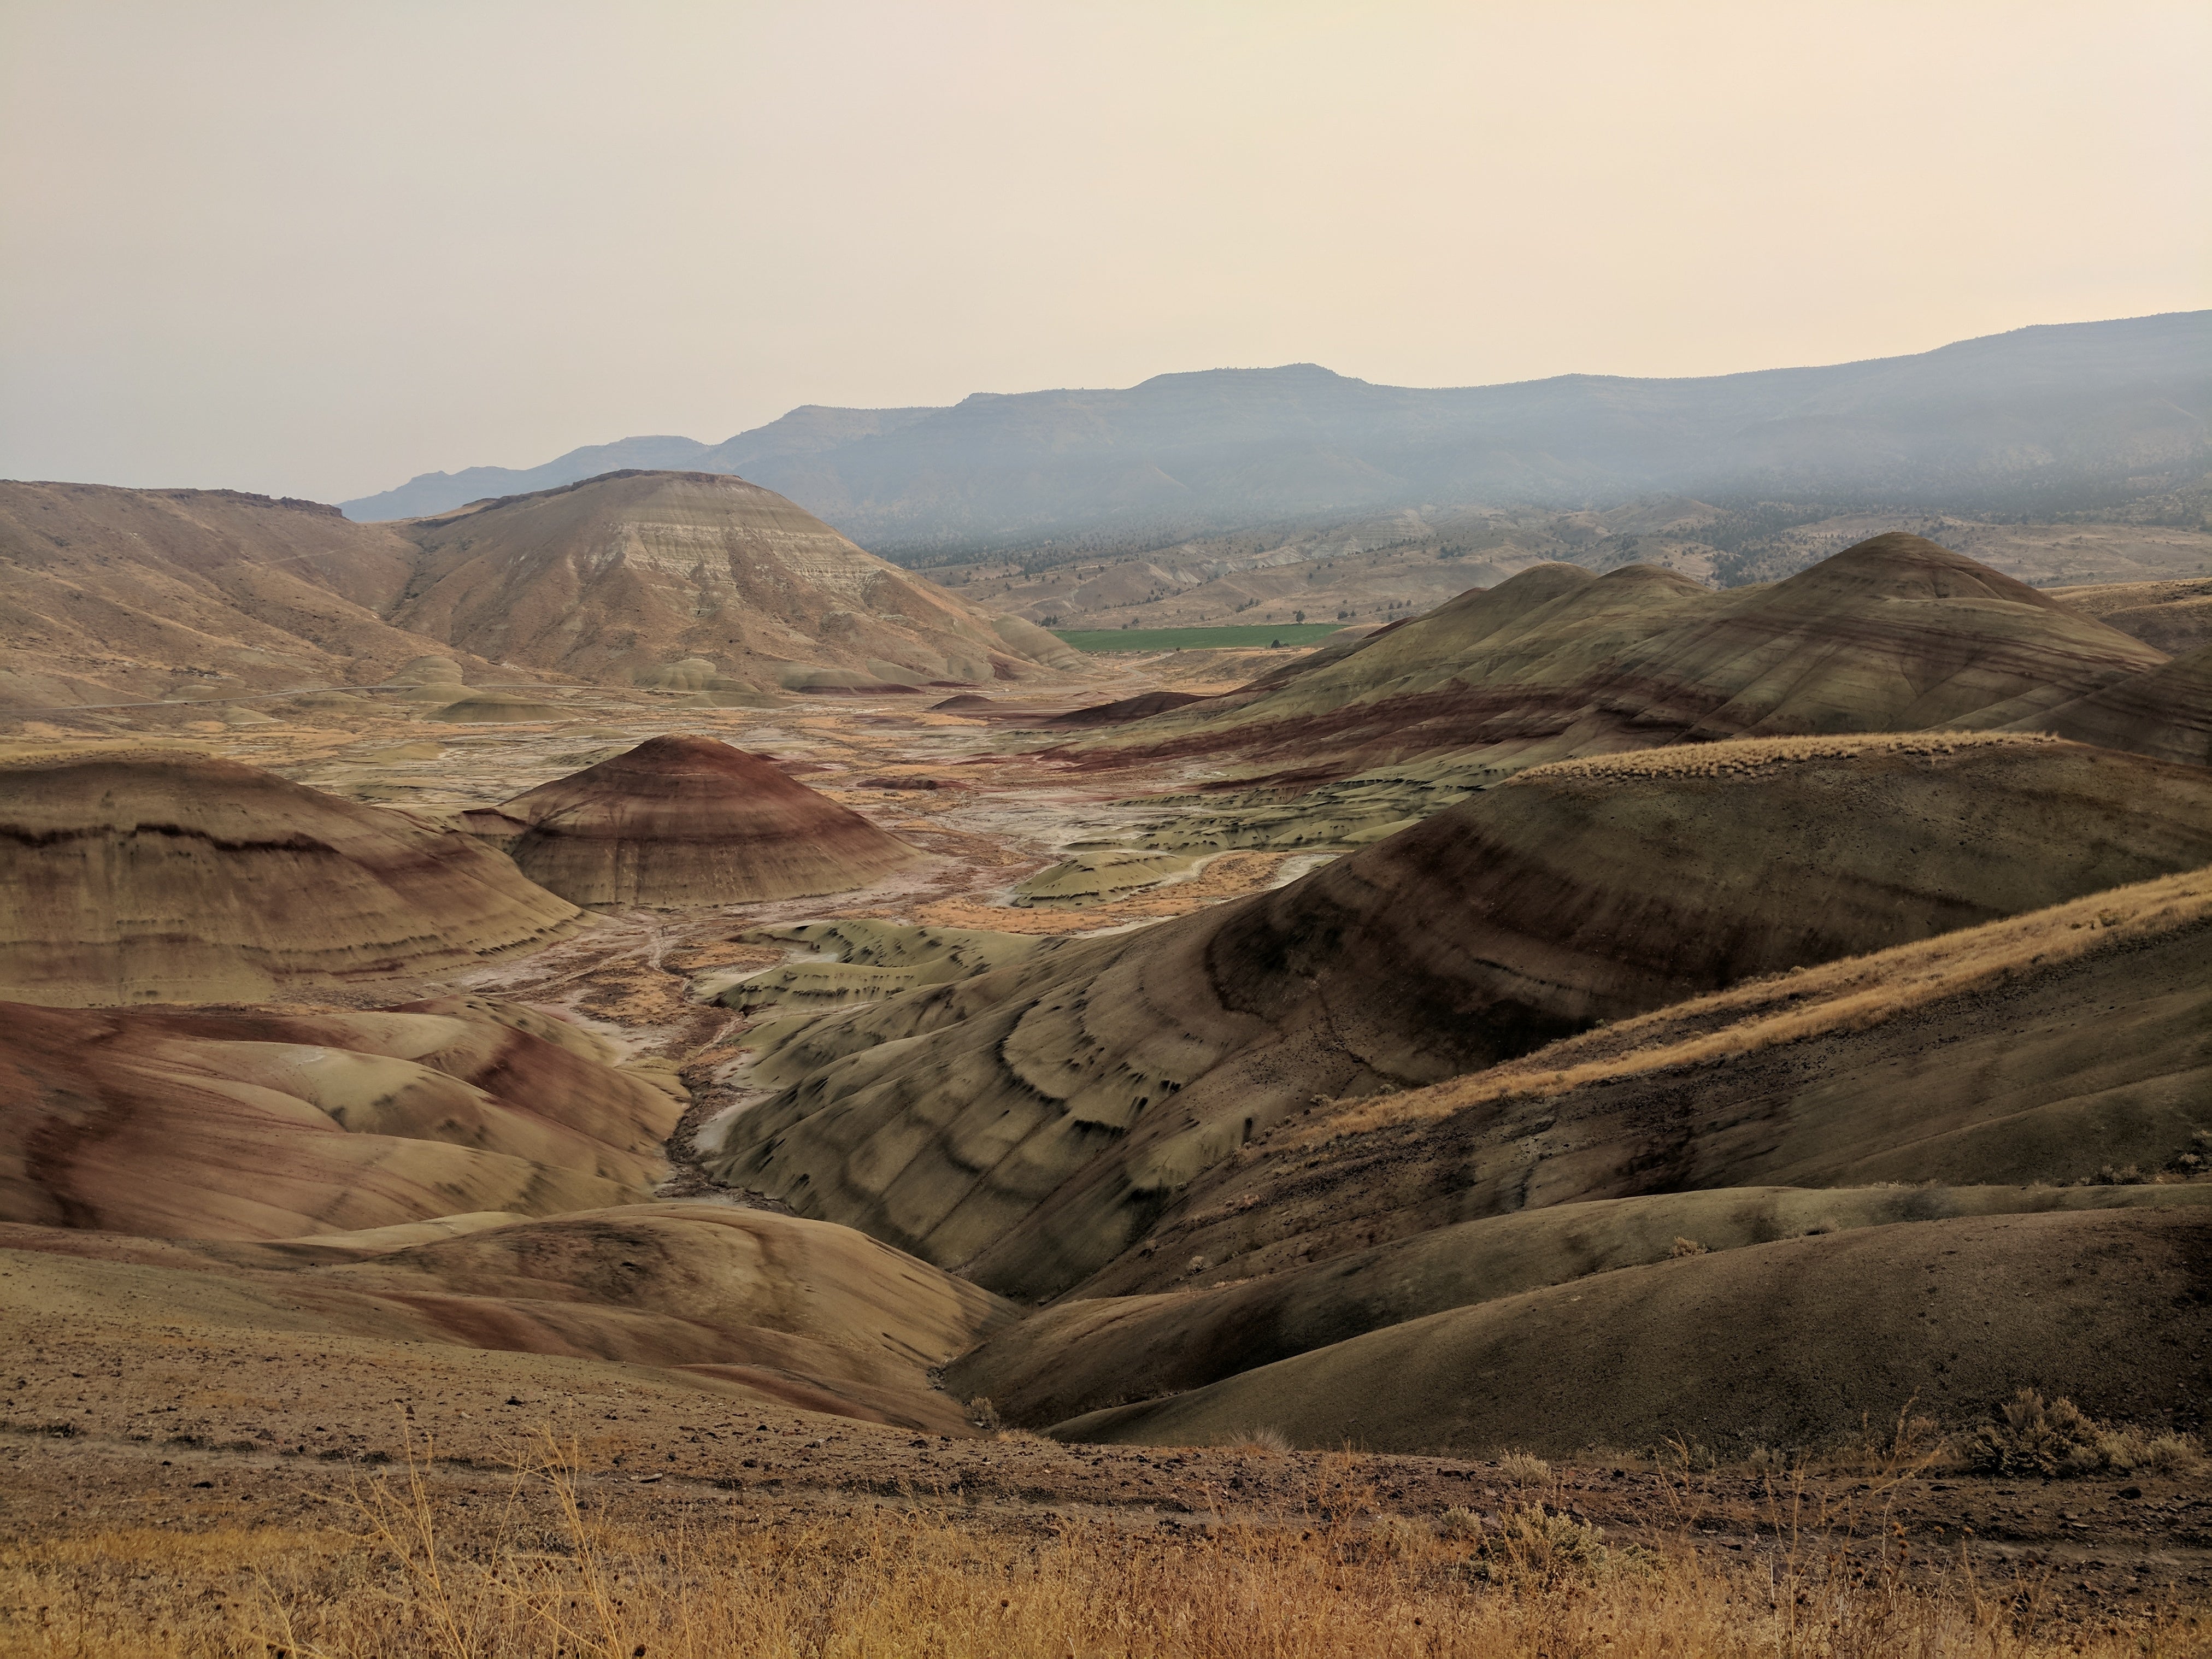 The painted hills, just 30 minutes from this campsite